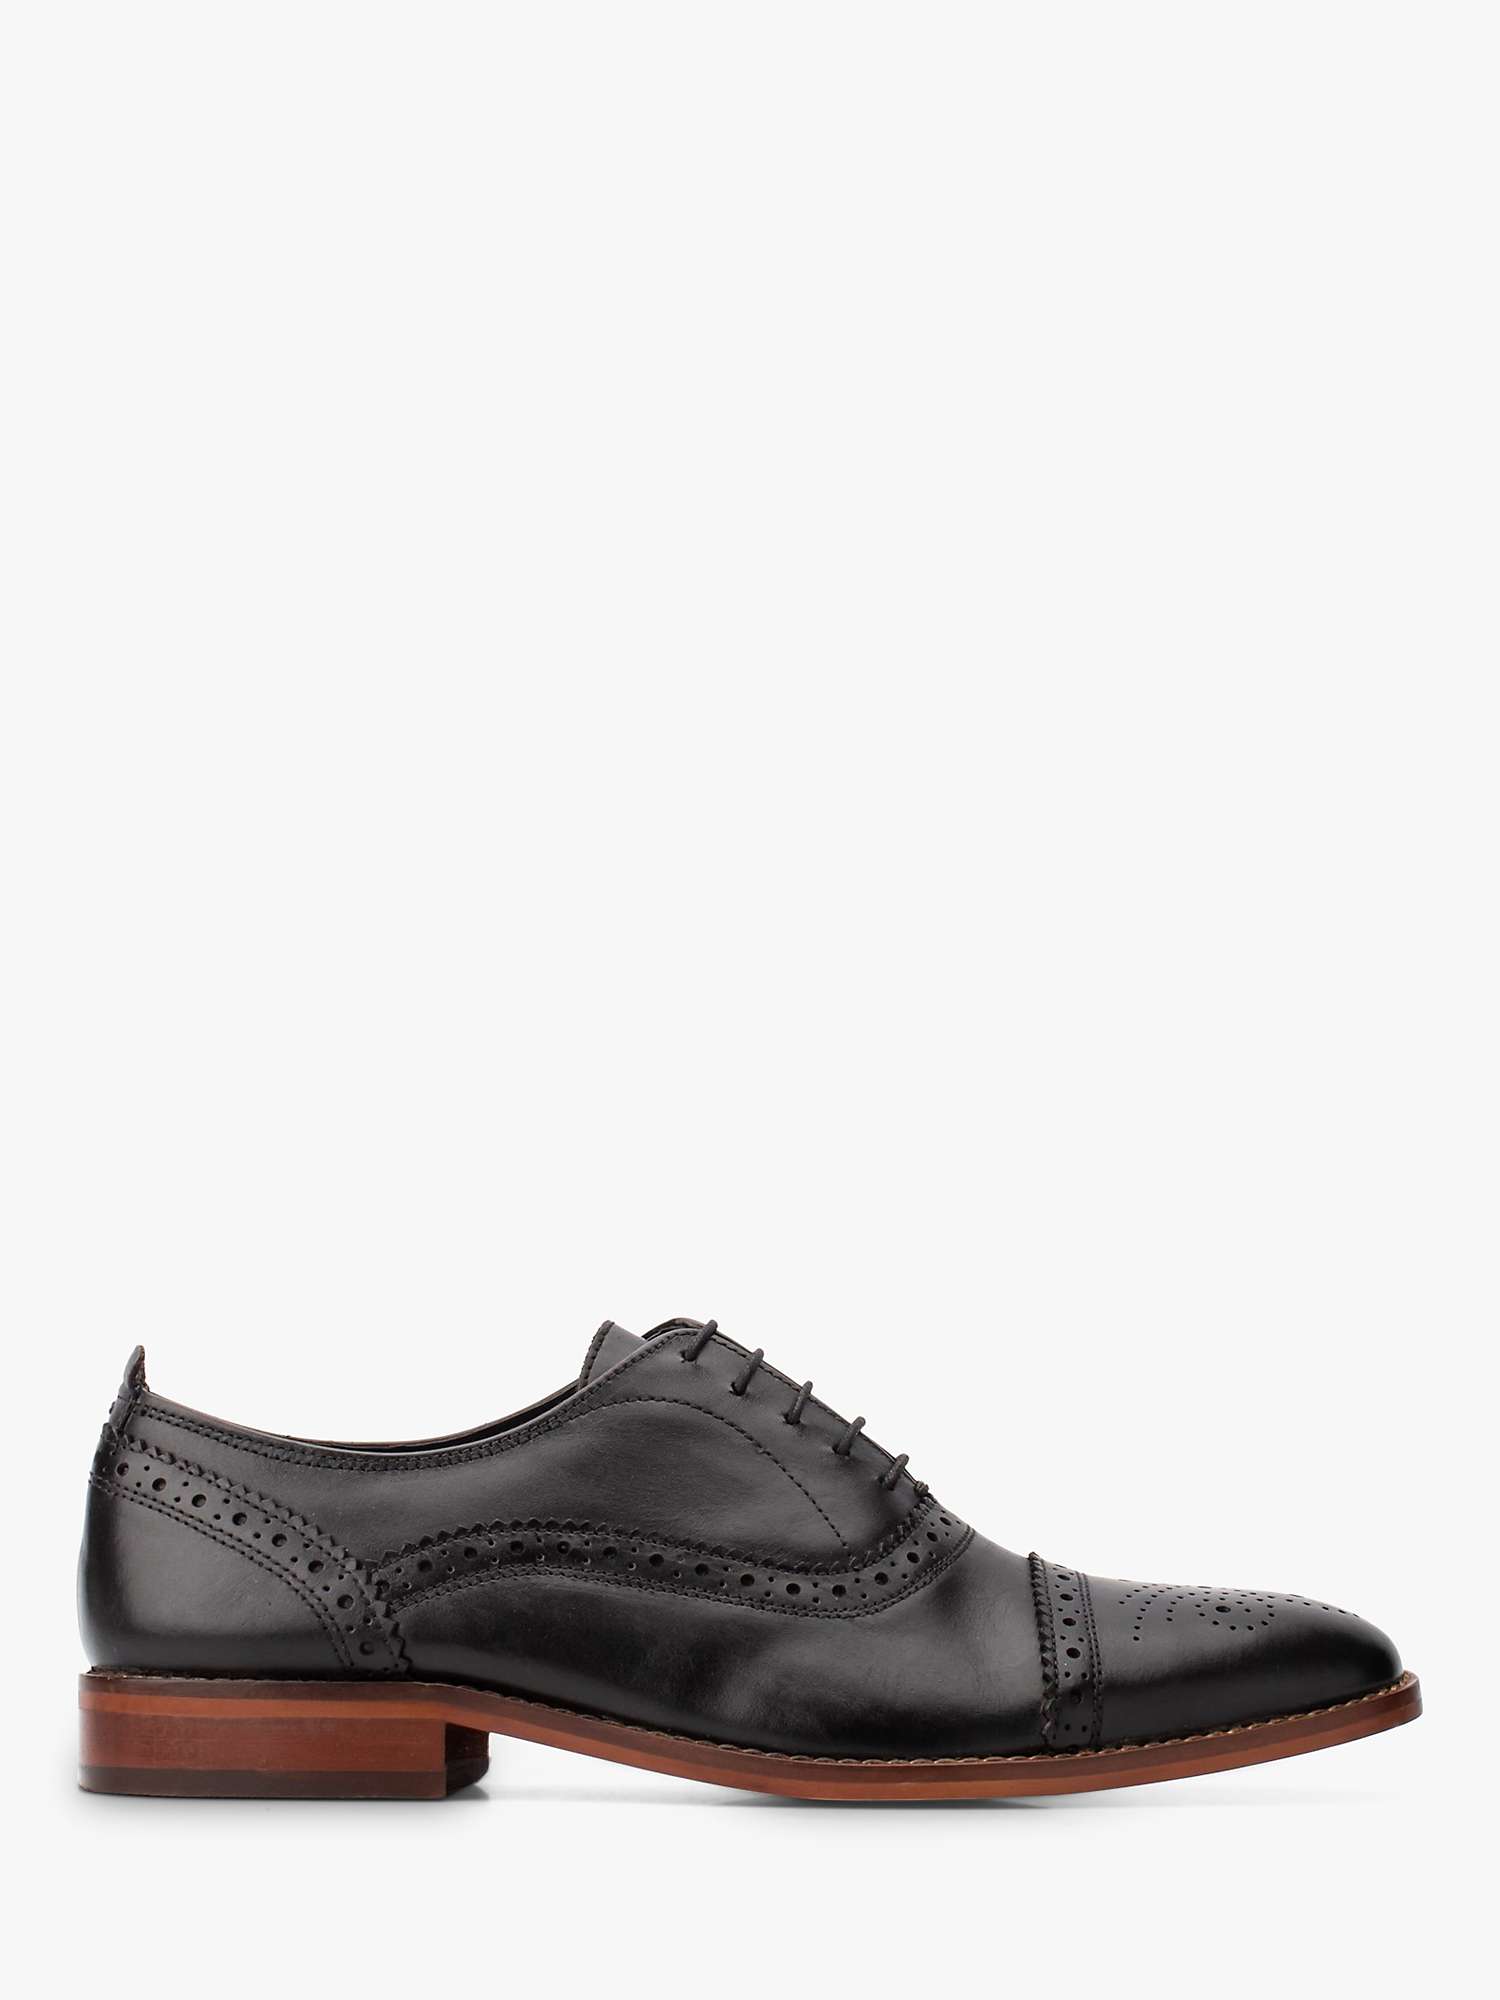 Buy Base London Cast Waxy Brogue Shoes, Black Online at johnlewis.com